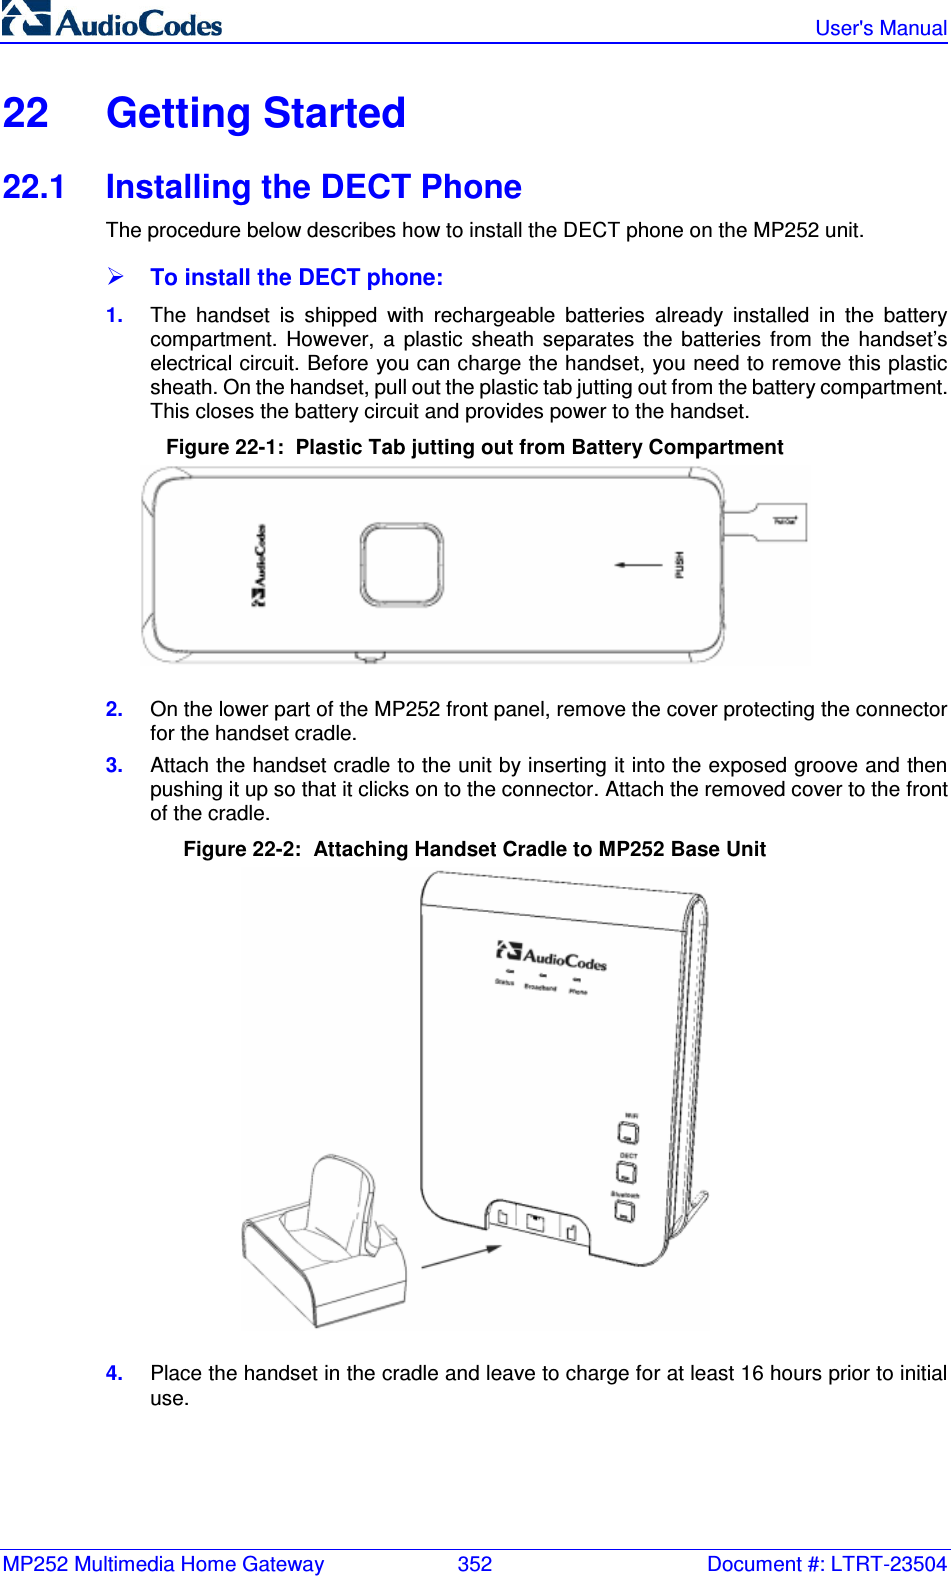 MP252 Multimedia Home Gateway  352  Document #: LTRT-23504   User&apos;s Manual  22  Getting Started 22.1  Installing the DECT Phone The procedure below describes how to install the DECT phone on the MP252 unit.  To install the DECT phone: 1.  The  handset  is  shipped  with  rechargeable  batteries  already  installed  in  the  battery compartment.  However,  a  plastic  sheath  separates  the  batteries  from  the  handset’s electrical circuit. Before you can charge the handset, you need to remove this plastic sheath. On the handset, pull out the plastic tab jutting out from the battery compartment. This closes the battery circuit and provides power to the handset. Figure 22-1:  Plastic Tab jutting out from Battery Compartment   2.  On the lower part of the MP252 front panel, remove the cover protecting the connector for the handset cradle.  3.  Attach the handset cradle to the unit by inserting it into the exposed groove and then pushing it up so that it clicks on to the connector. Attach the removed cover to the front of the cradle. Figure 22-2:  Attaching Handset Cradle to MP252 Base Unit  4.  Place the handset in the cradle and leave to charge for at least 16 hours prior to initial use. 